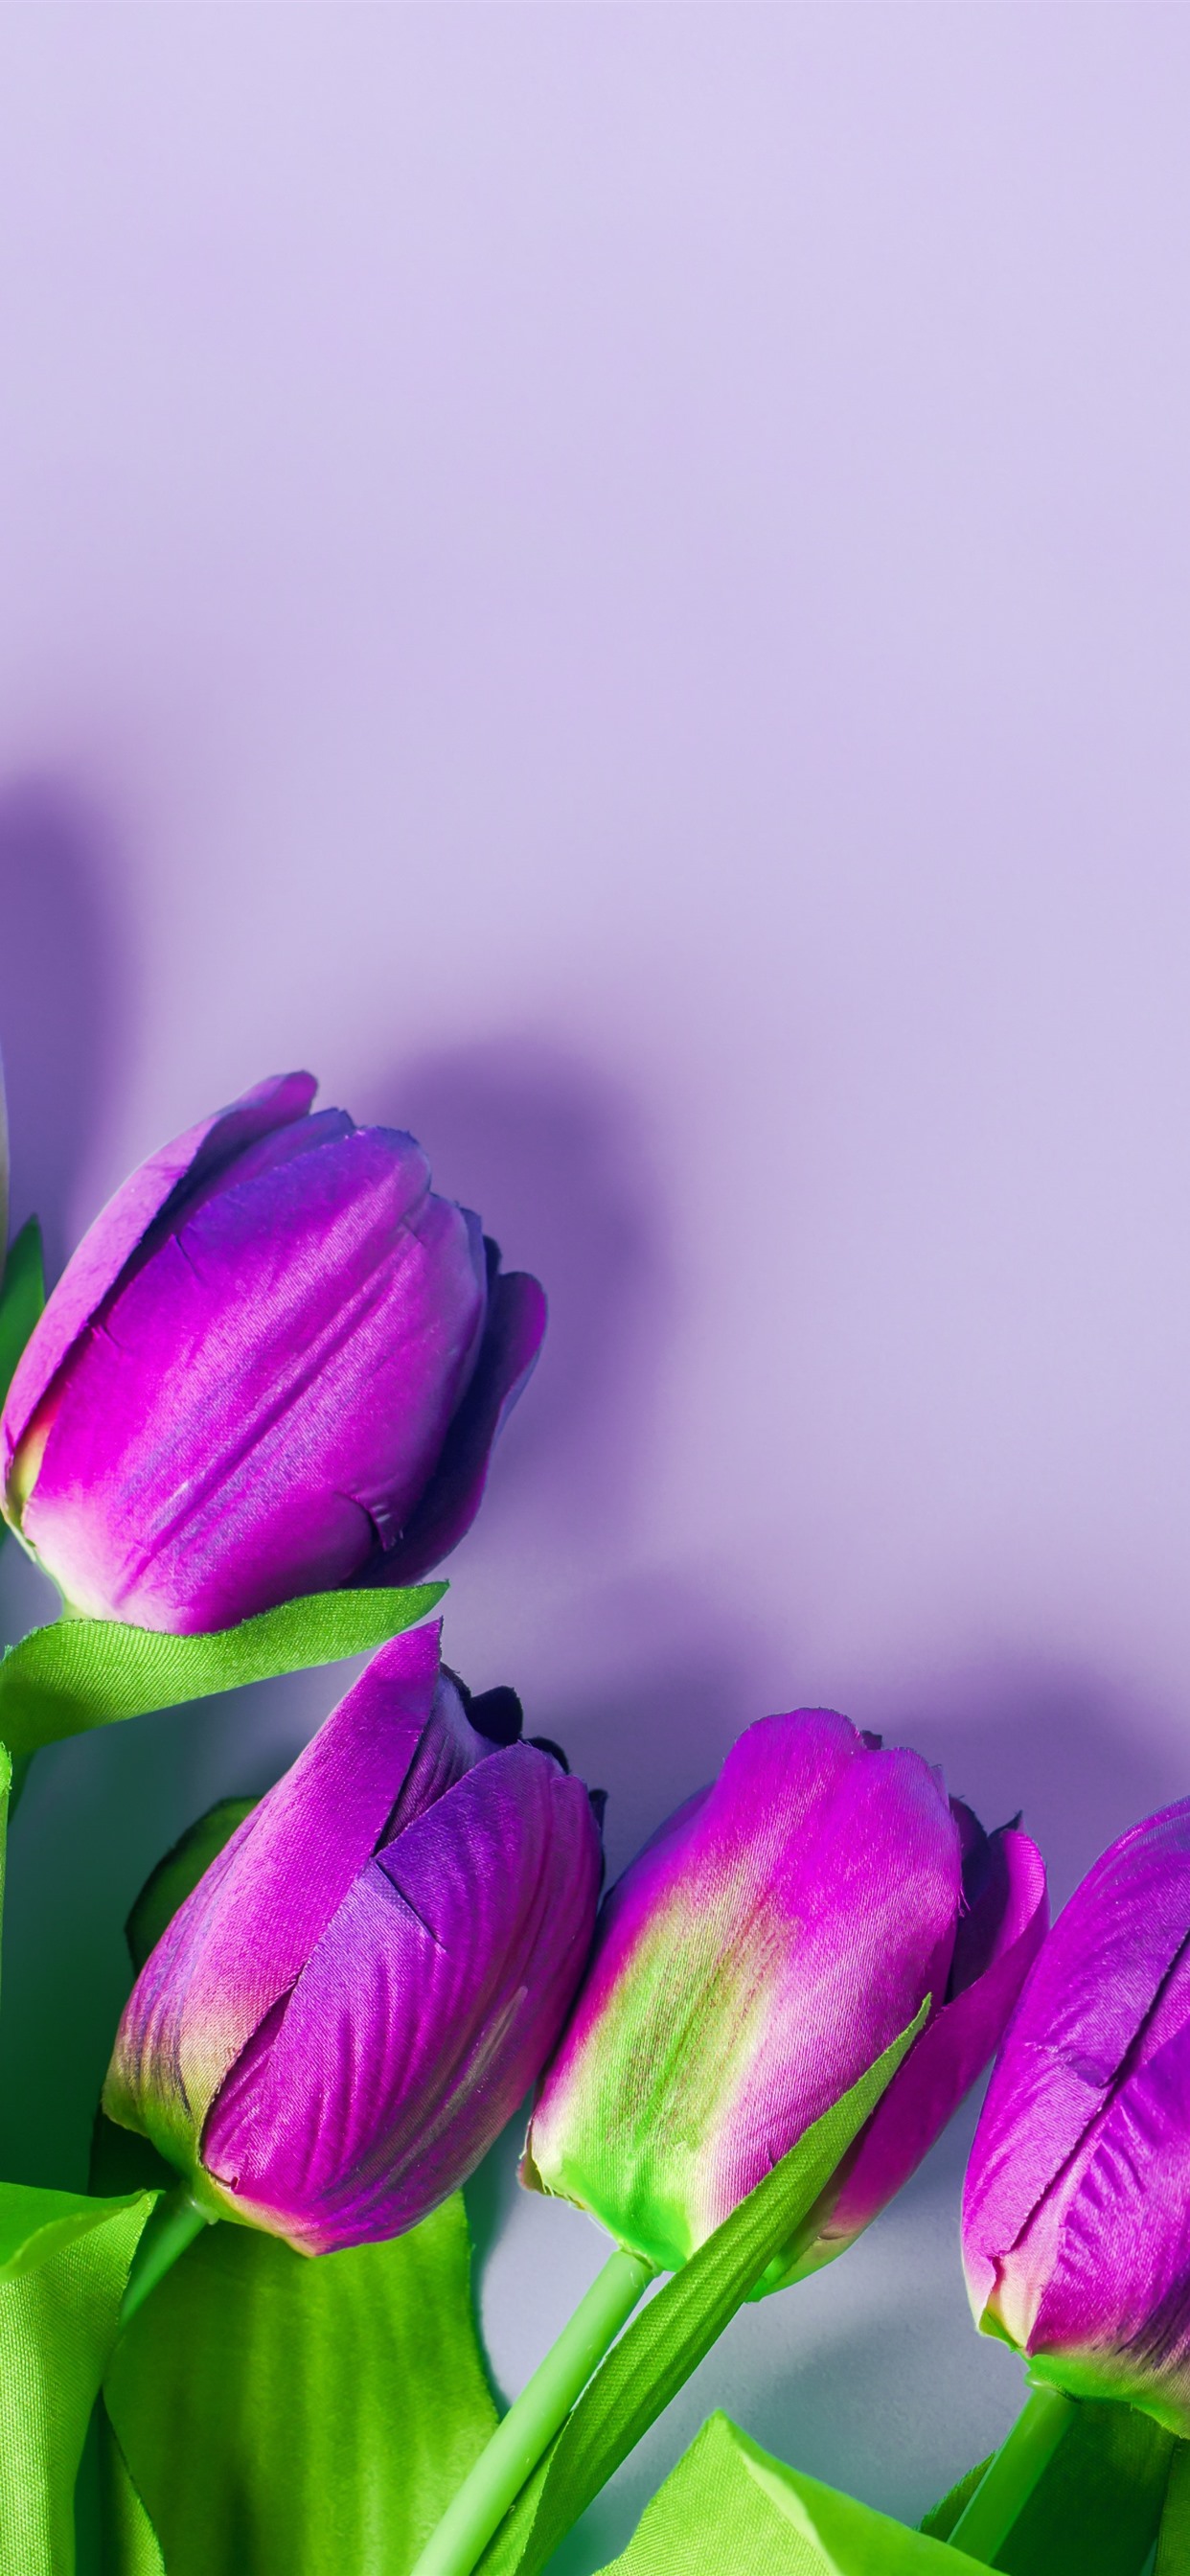 Purple Tulips, Flowers, Light Pink Background 1242x2688 IPhone 11 Pro XS Max Wallpaper, Background, Picture, Image